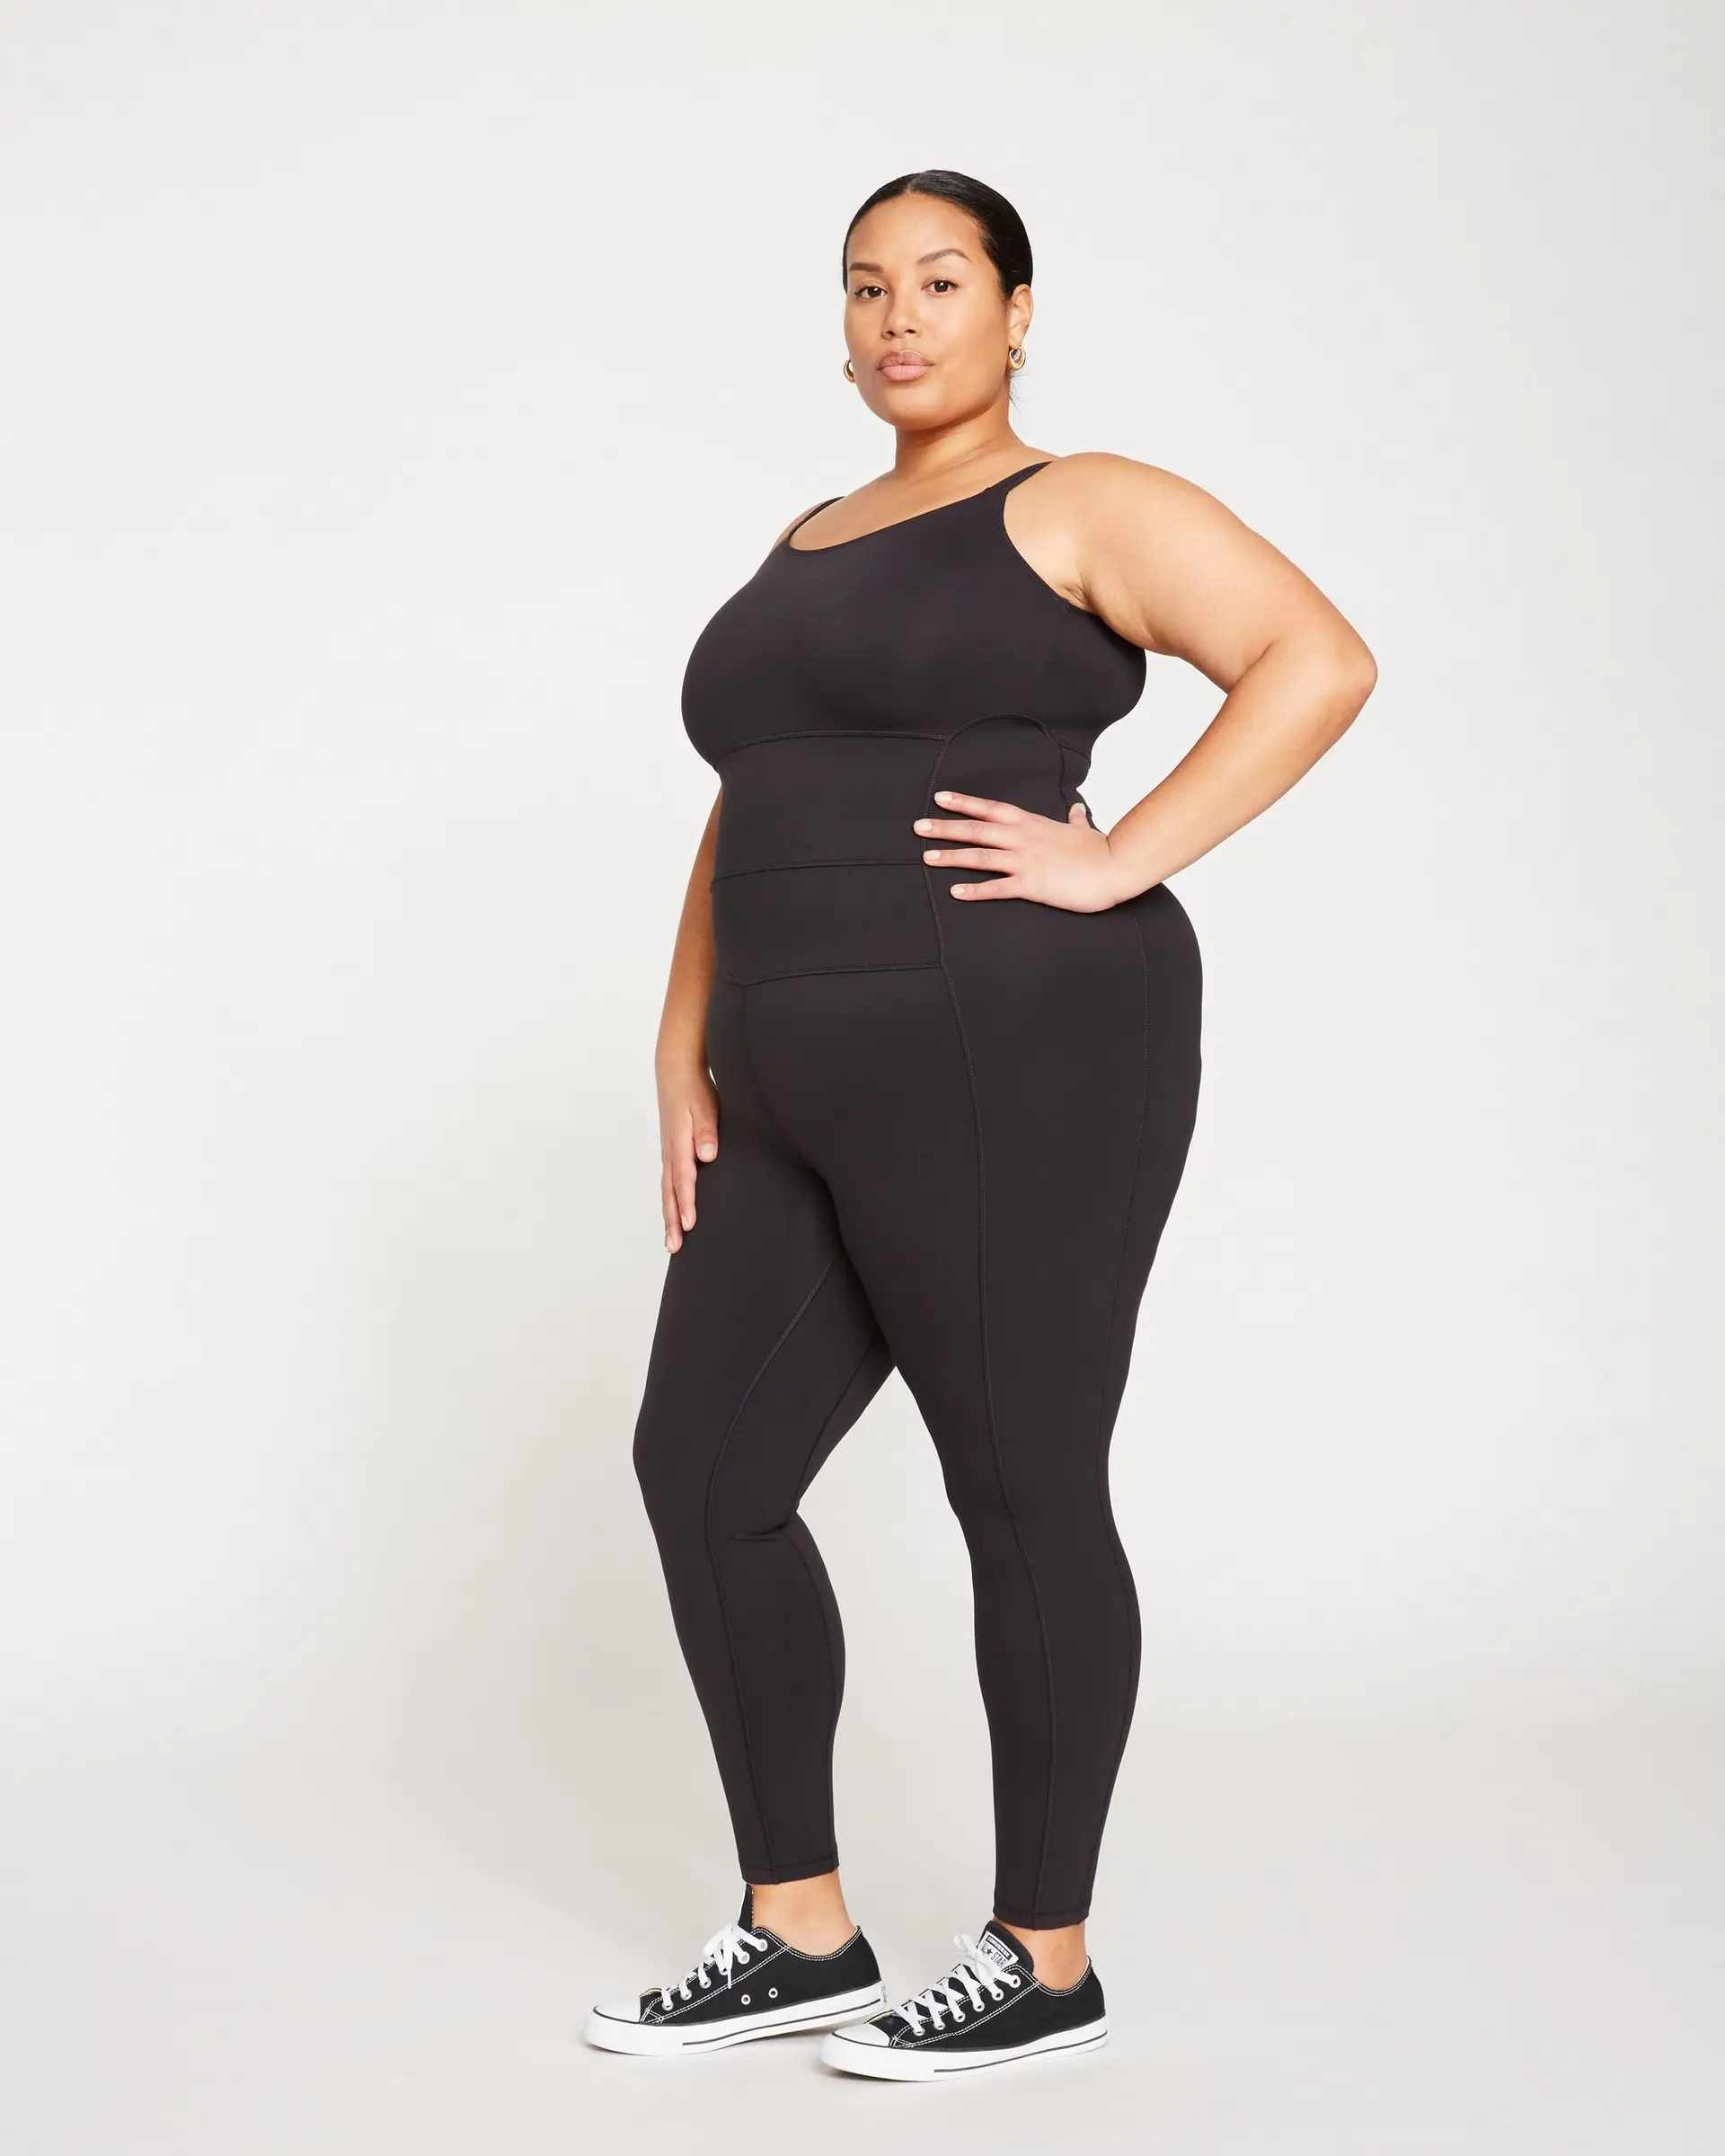 Need Really Cute and Functional Plus Size Activewear? Here's 30